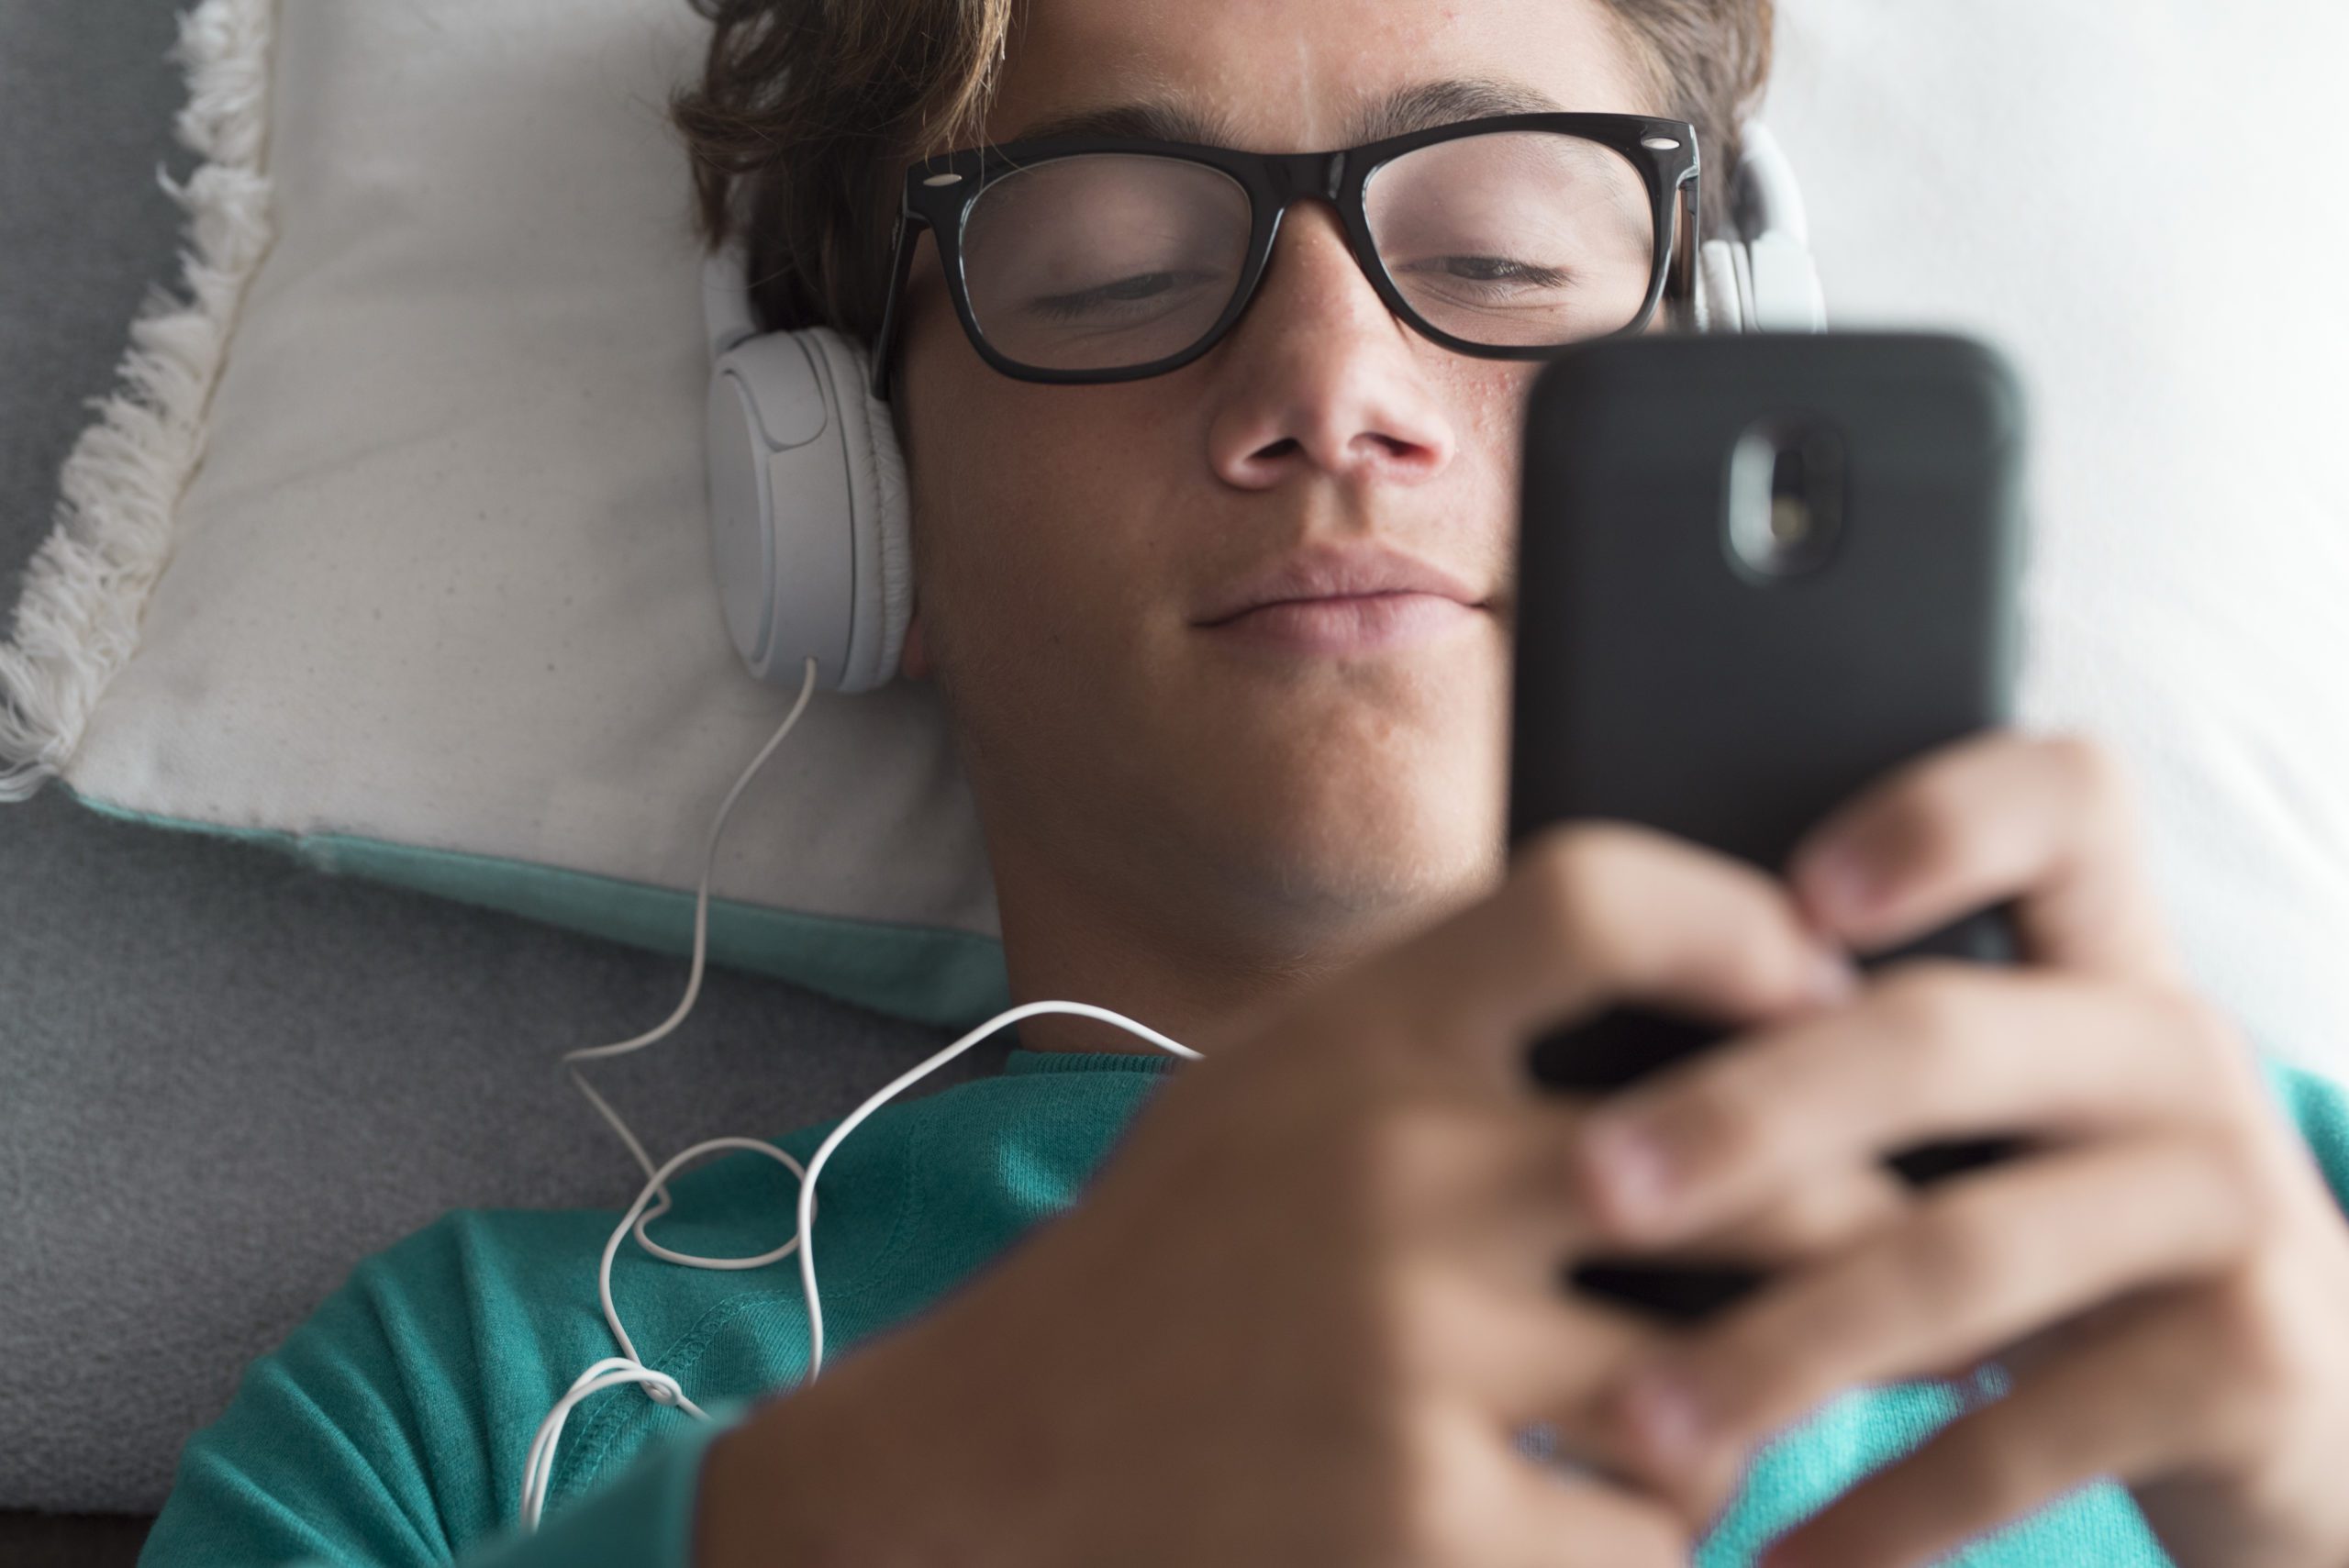 young boy with headphones on looking at his phone